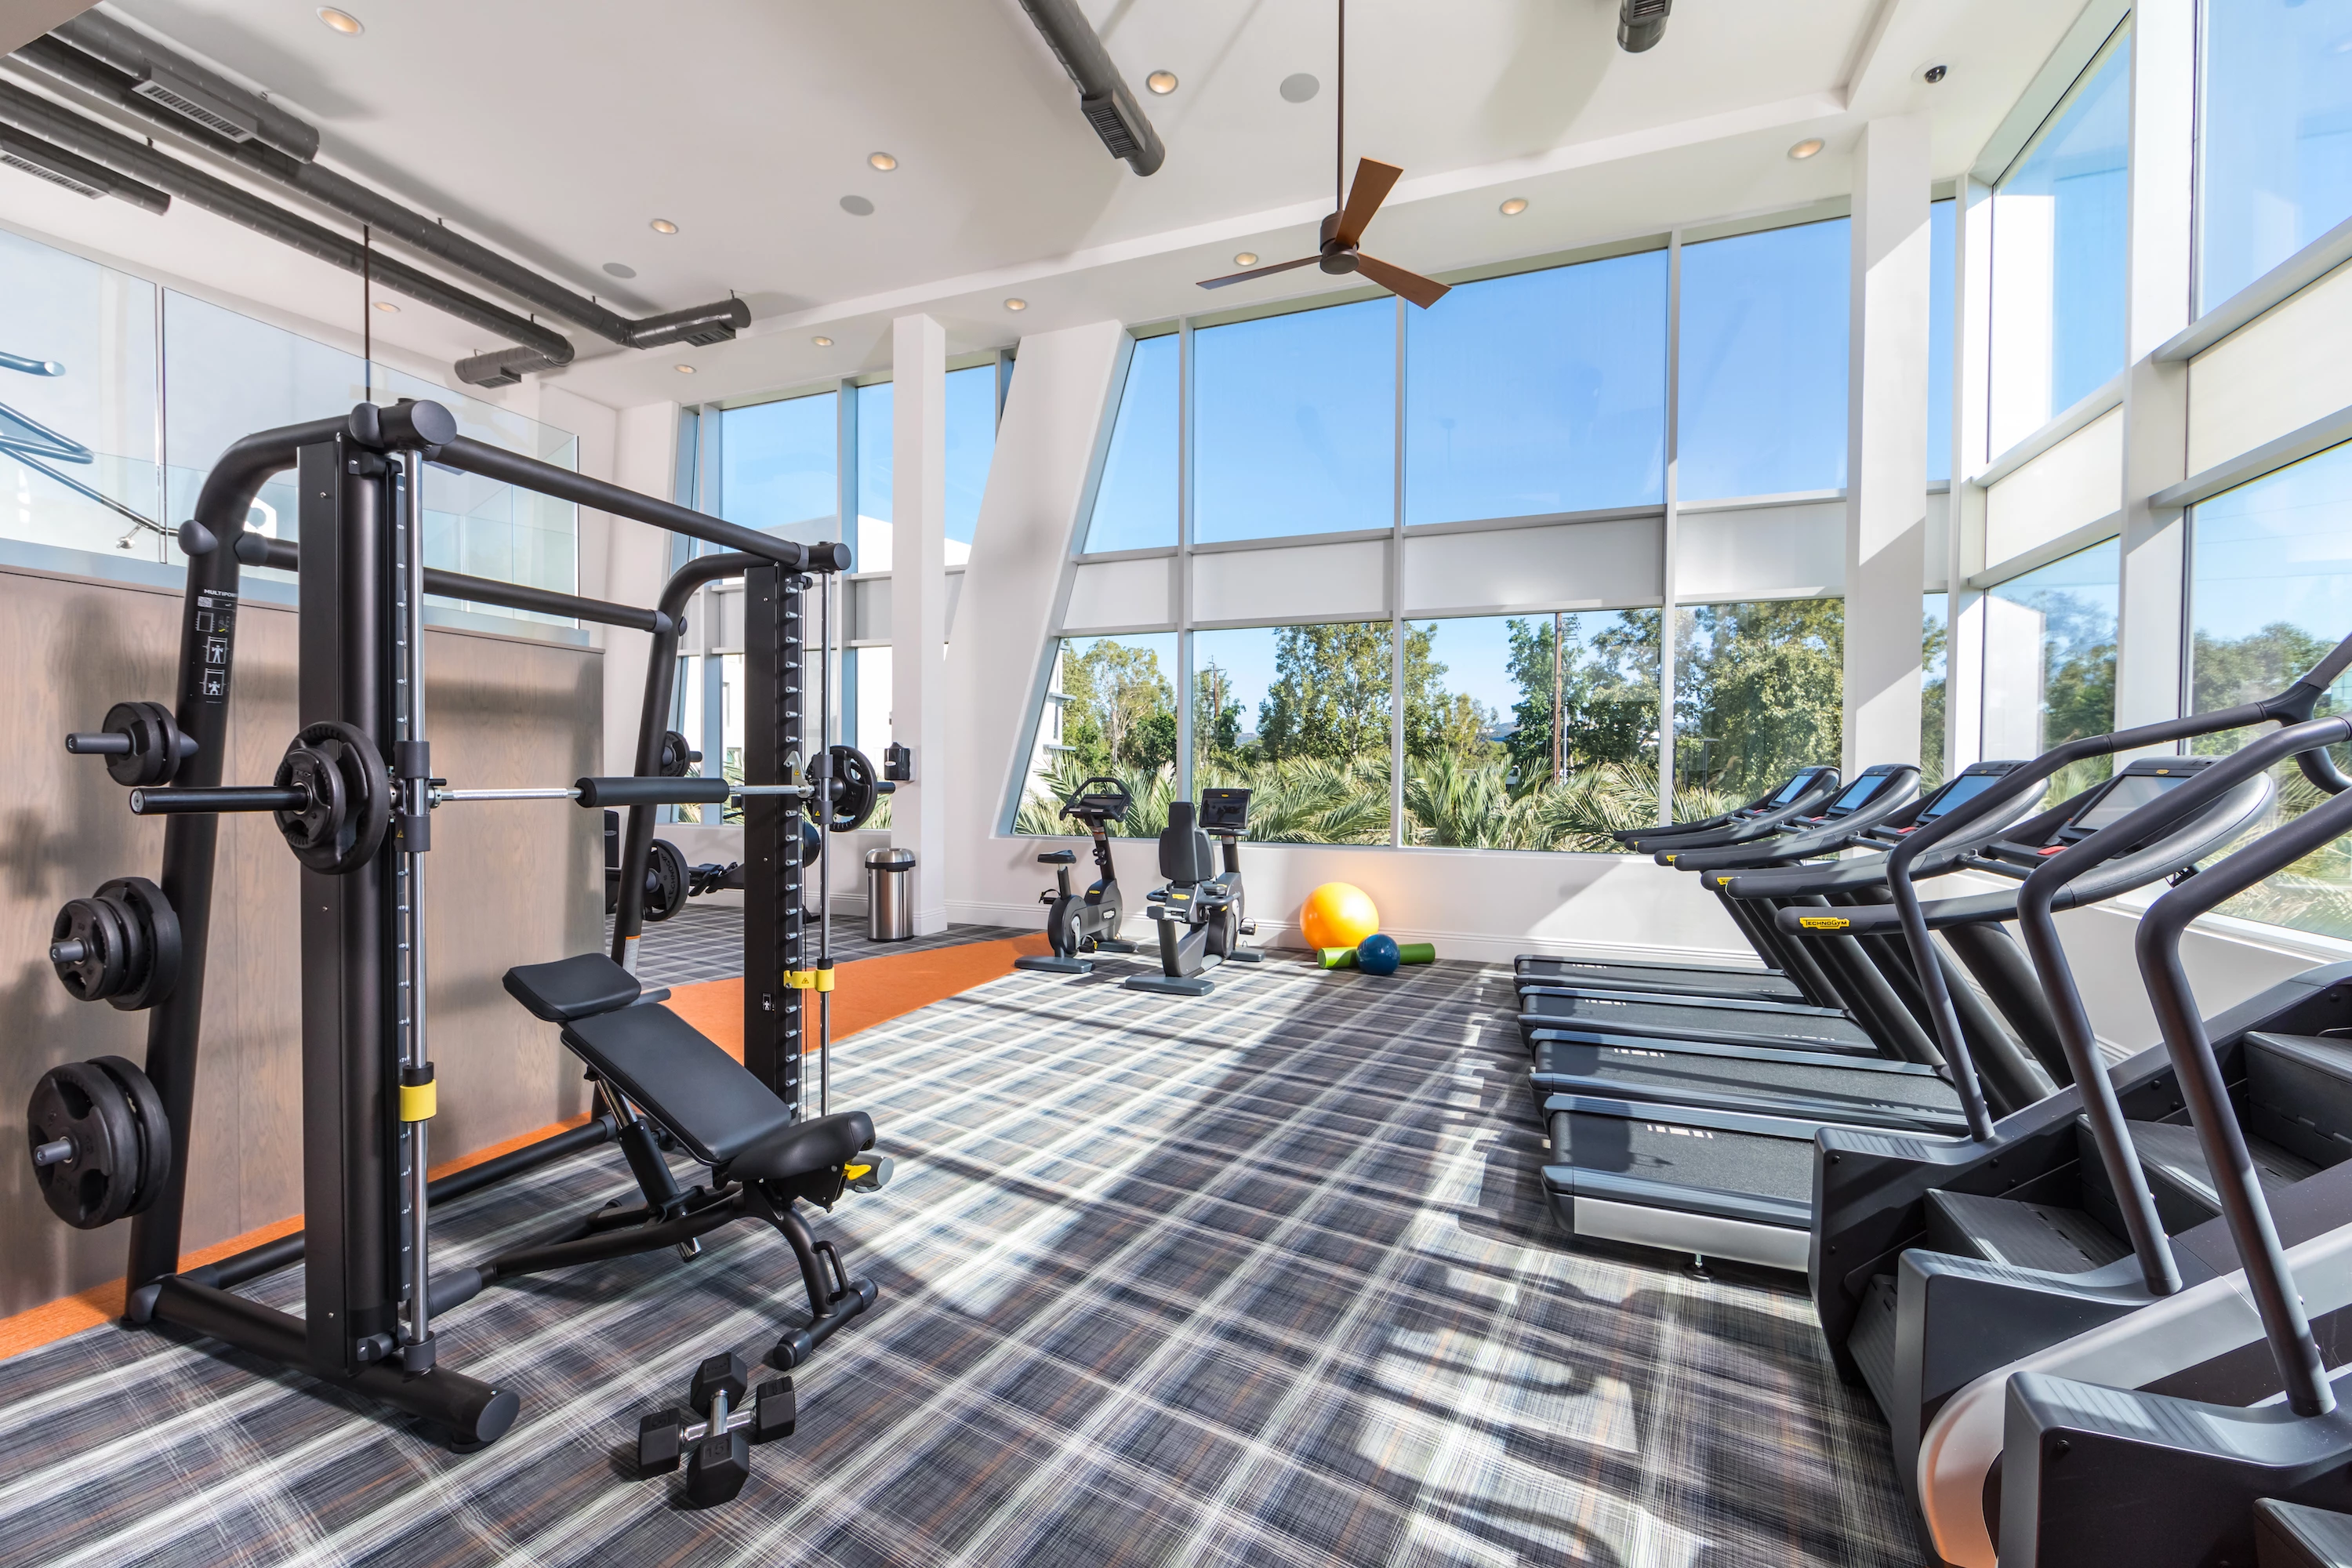 1251-3-amenity-tower-fitness-center-cardio-and-weight-bench-at-vela-on-ox-apartments.jpg